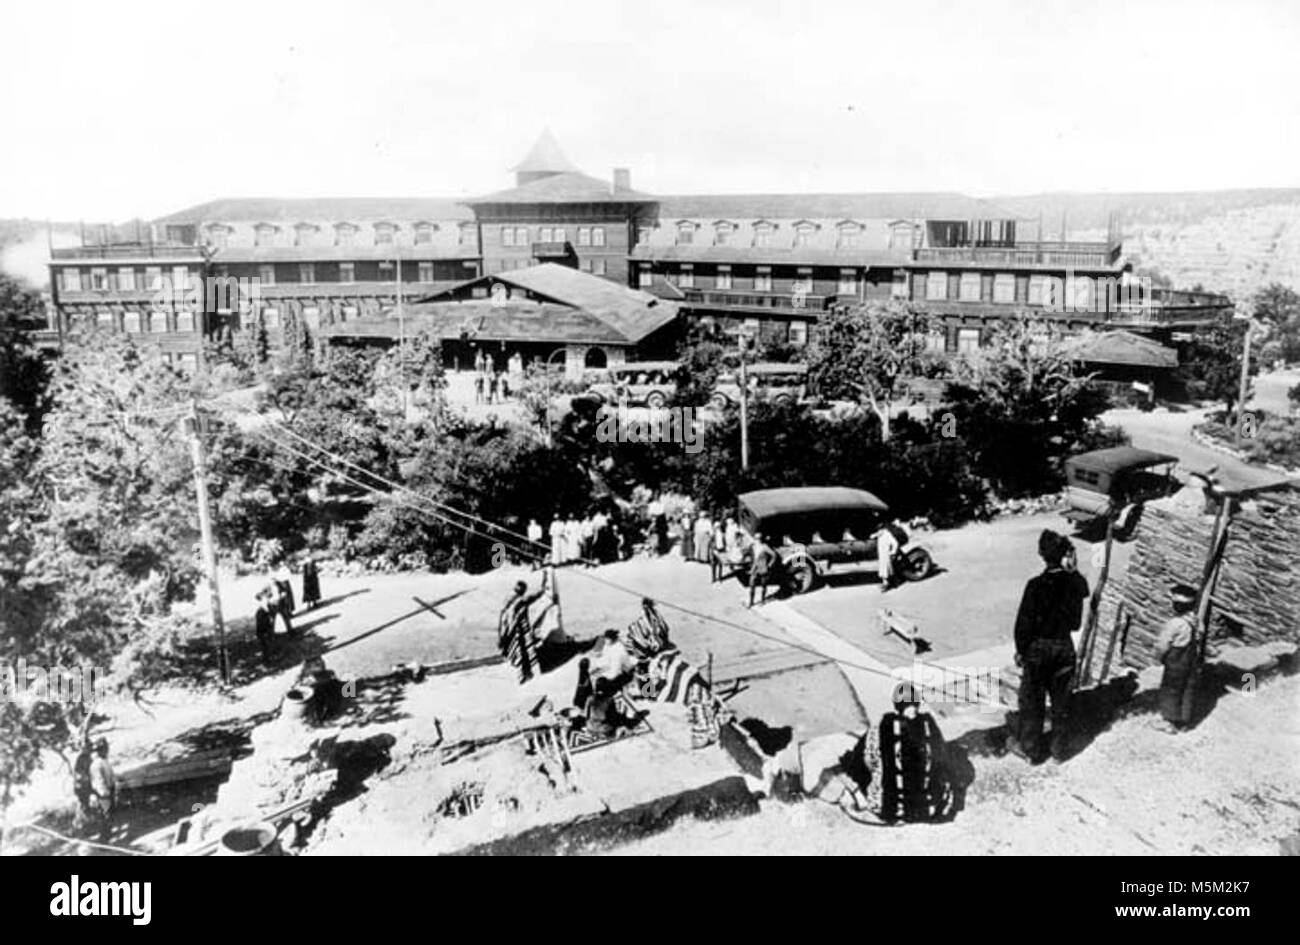 Grand Canyon Historic El Tovar Hotel . EL TOVAR AS SEEN FROM THE ROOF OF HOPI HOUSE.  NATIVE EMPLOYEES POSING ON DIFFERENT LEVELS OF ROOF. FRED HARVEY TOURING CARS PARKED AROUND ENTRANCE LOOP. CIRCA 1922. FRED HARVEY Stock Photo